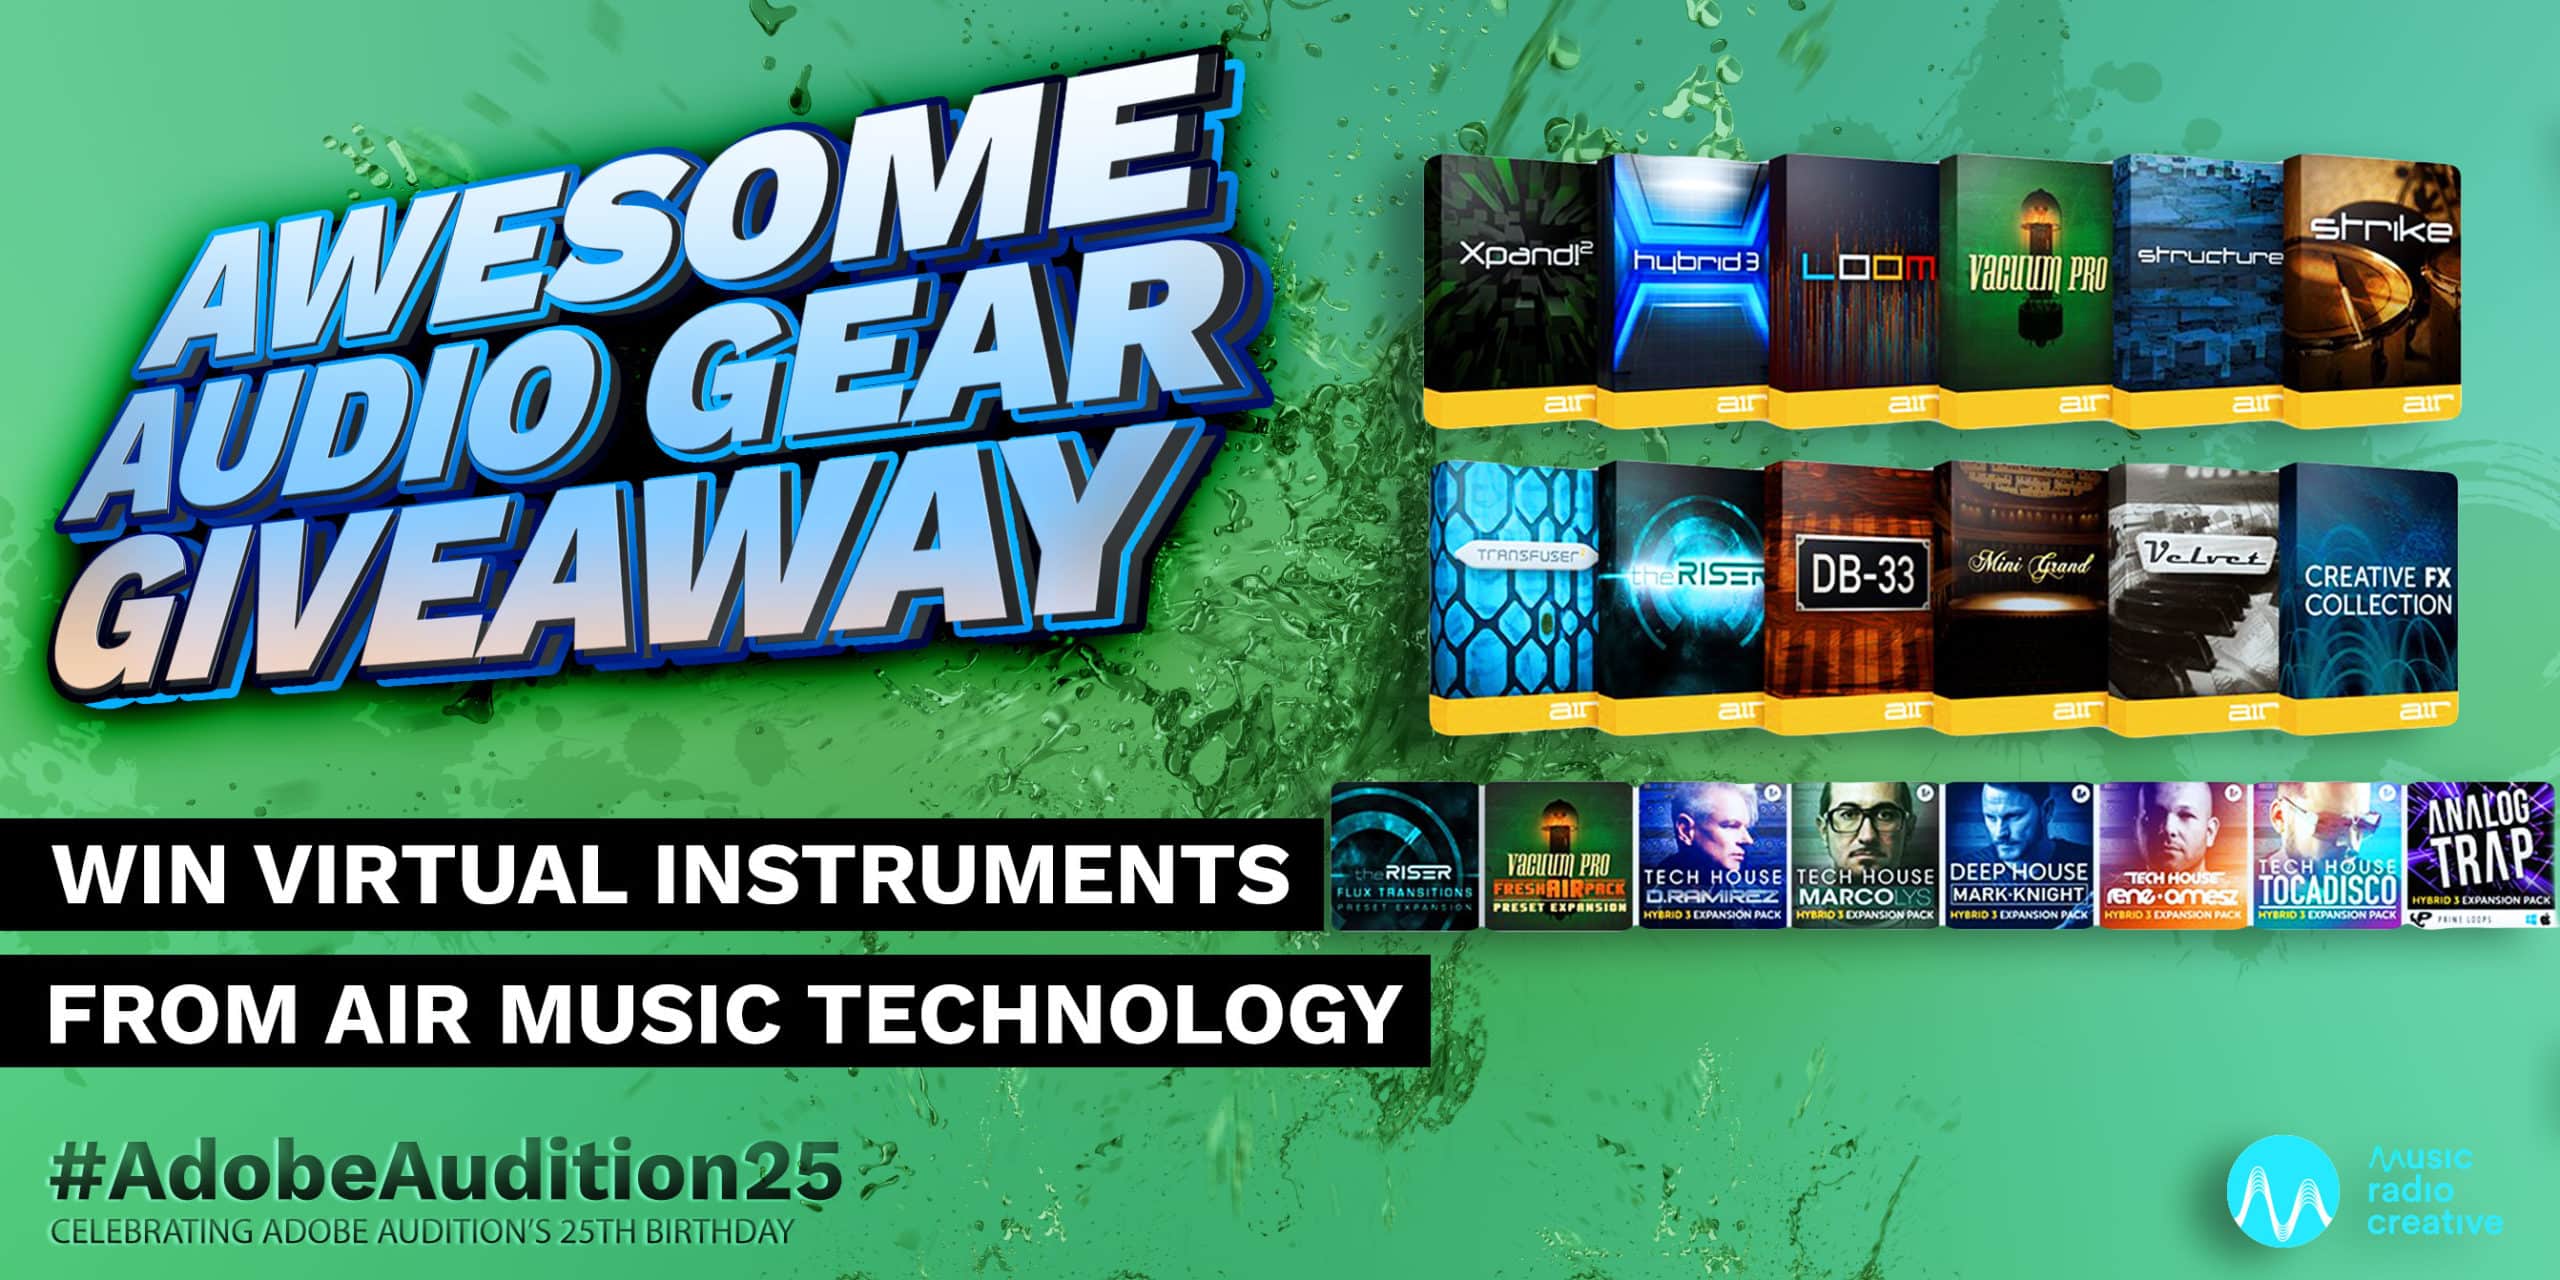 Win Virtual Instruments from AIR Music Technology Awesome Audio Gear Giveaway  Music Radio Creative